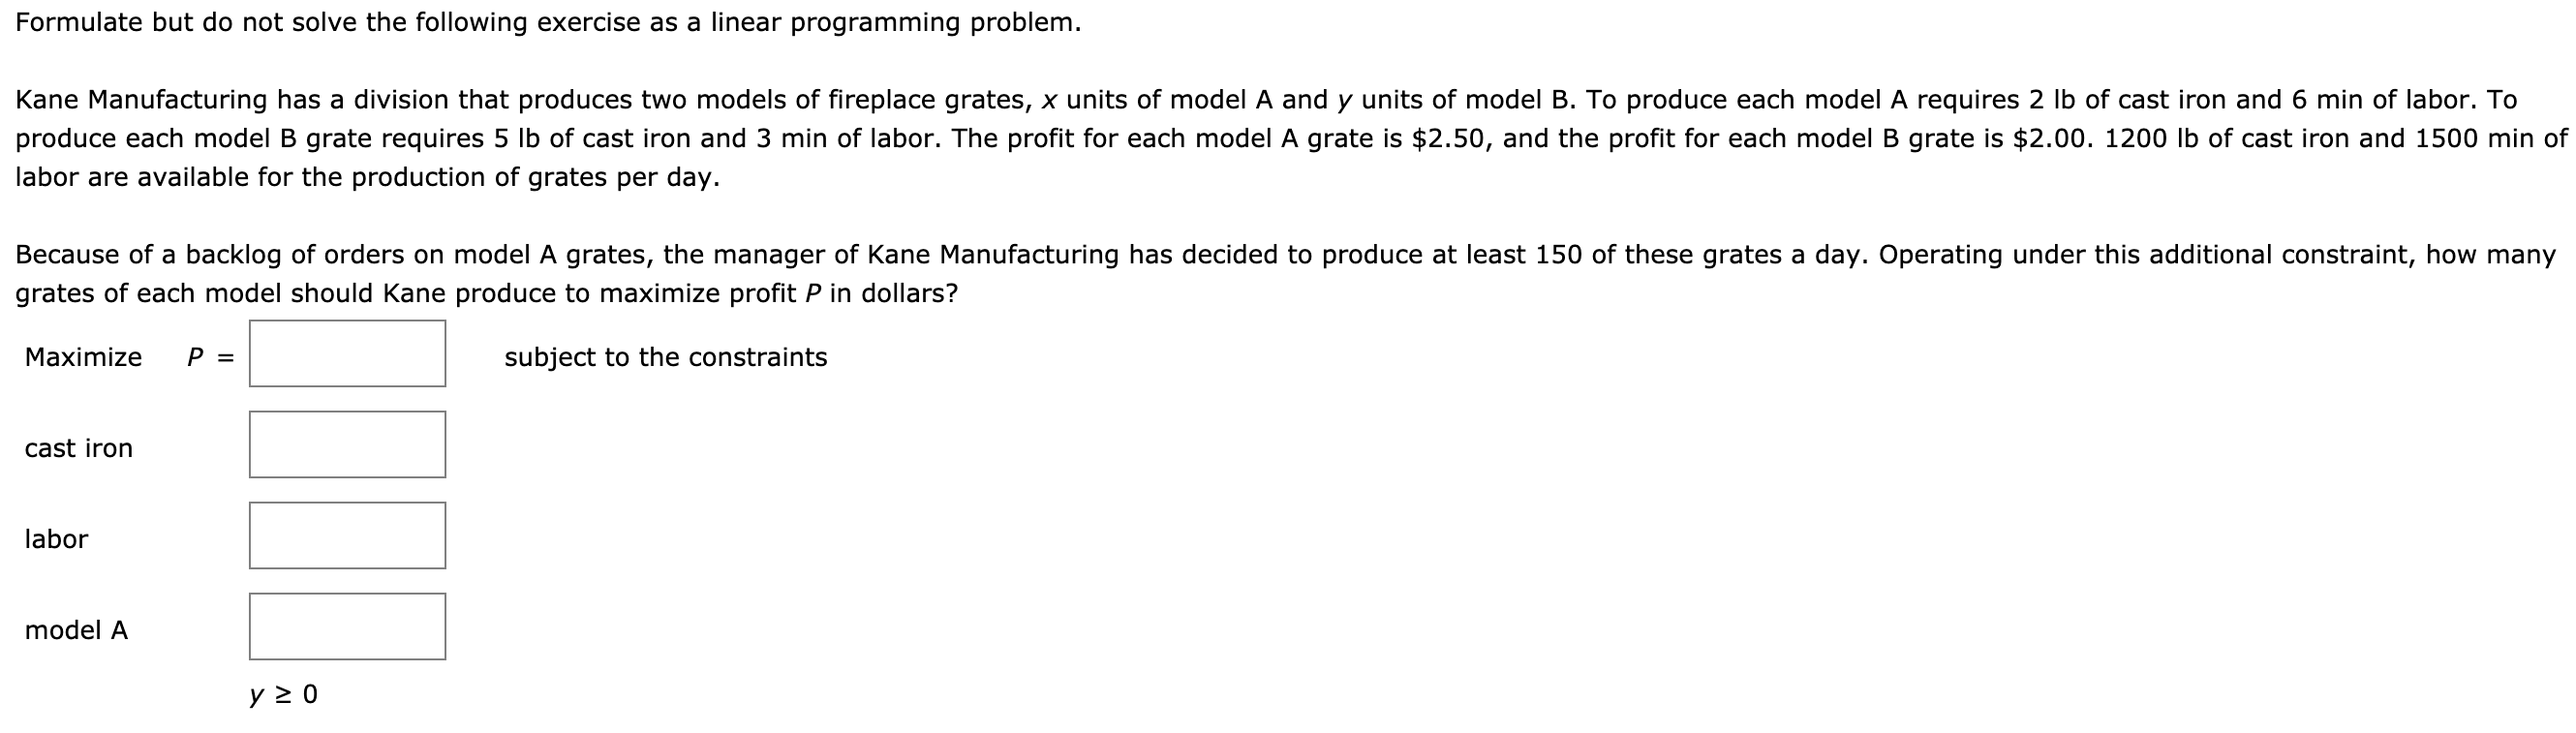 Formulate but do not solve the following exercise as a linear programming problem.
Kane Manufacturing has a division that produces two models of fireplace grates, x units of model A and y units of model B. To produce each model A requires 2 Ib of cast iron and 6 min of labor. To
produce each model B grate requires 5 lb of cast iron and 3 min of labor. The profit for each model A grate is $2.50, and the profit for each model B grate is $2.00. 1200 lb of cast iron and 1500 min of
labor are available for the production of grates per day.
Because of a backlog of orders on model A grates, the manager of Kane Manufacturing has decided to produce at least 150 of these grates a day. Operating under this additional constraint, how many
grates of each model should Kane produce to maximize profit P in dollars?
Maximize
P =
subject to the constraints
cast iron
labor
model A
y 2 0
